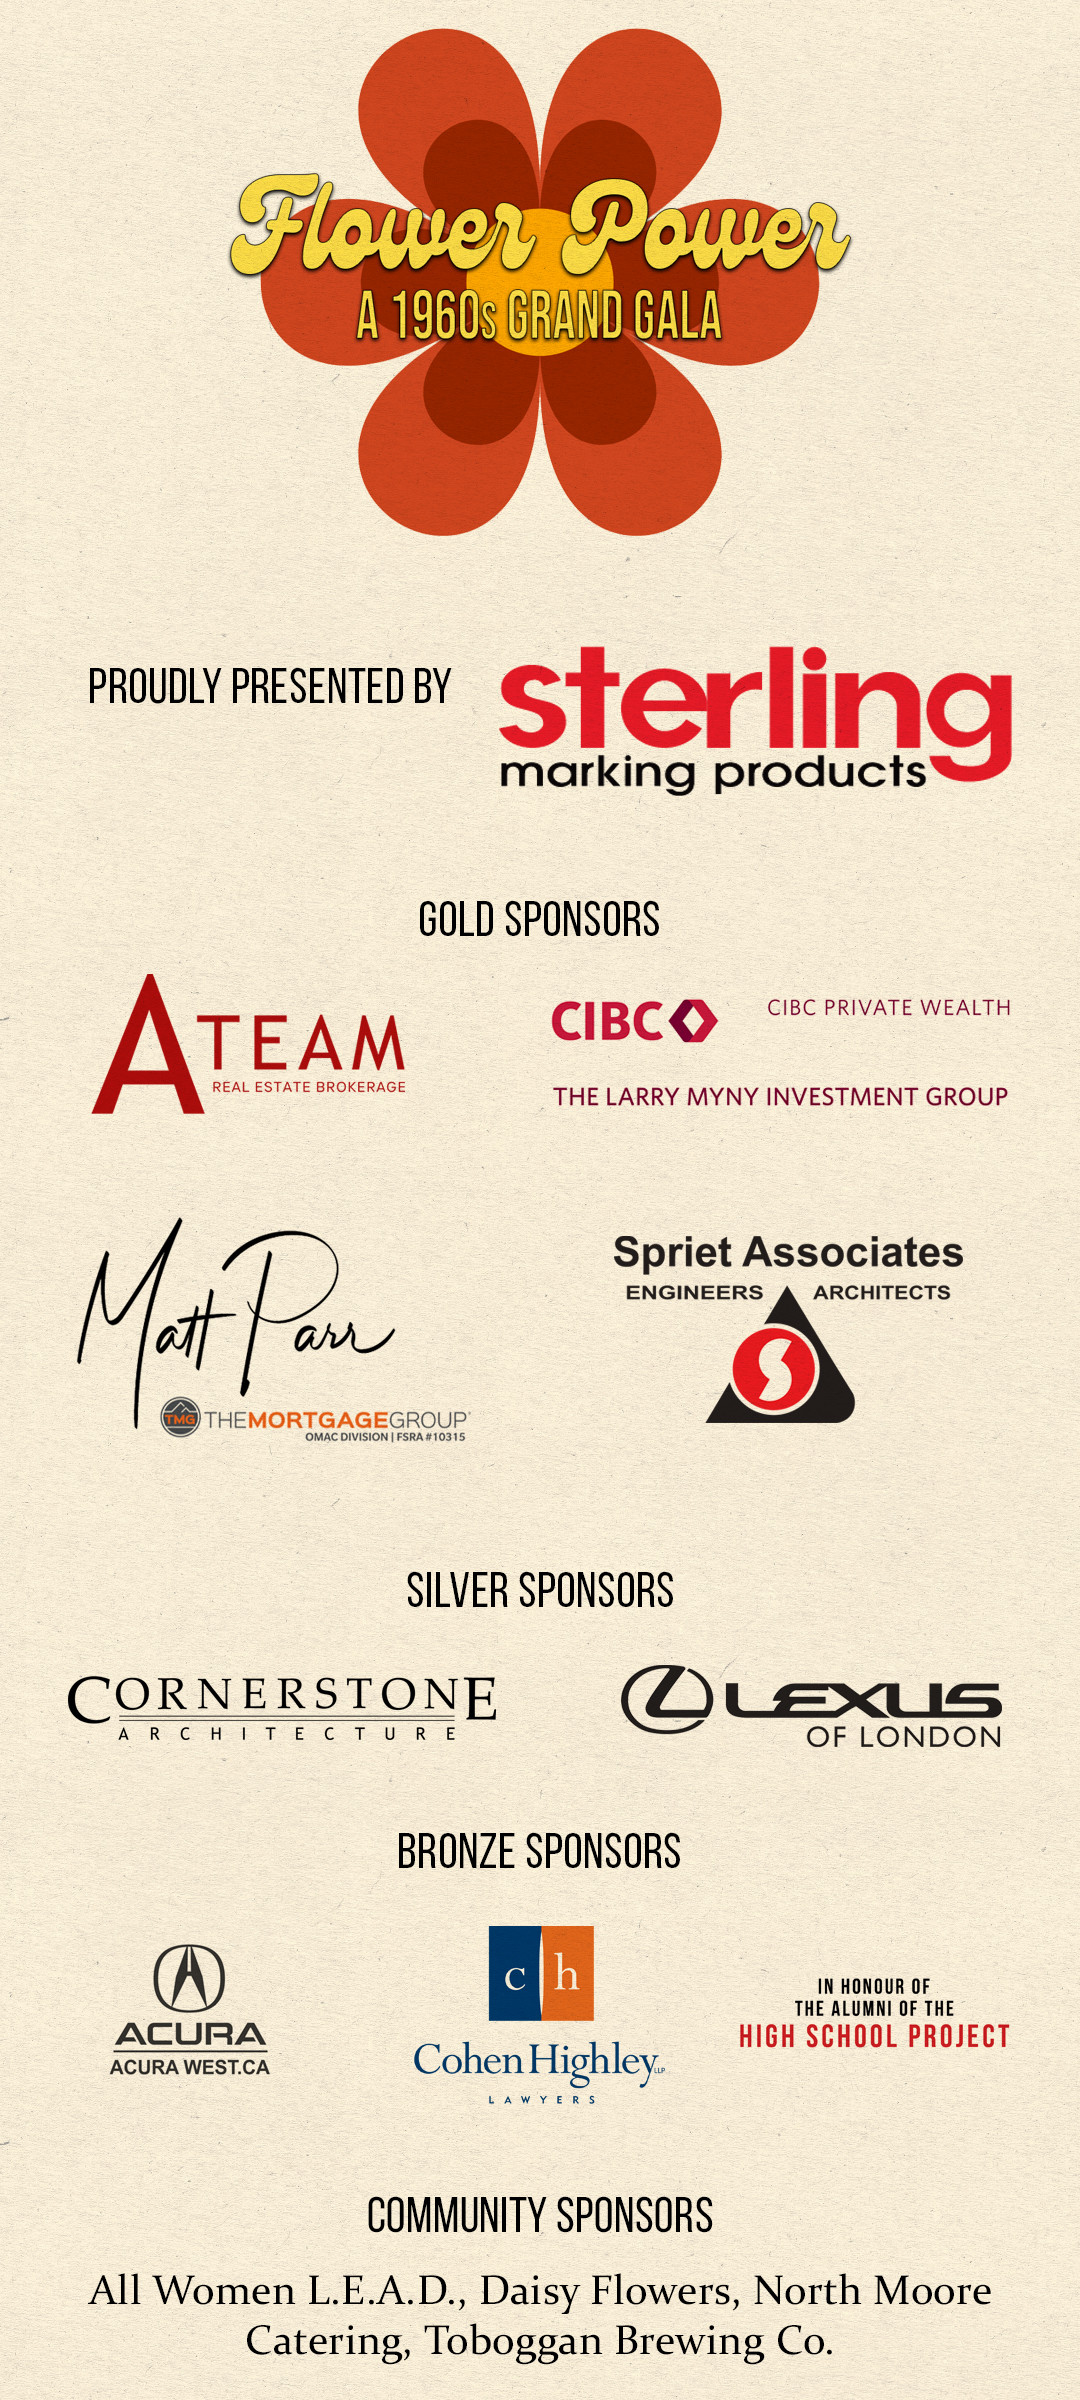 Presenting Sponsor, Sterling Marking Products. Gold Sponsors: A-Team Real Estate Brokerage, Larry Myny Investment Group CIBC Private Wealth, Matt Parr Mortgages, Spriet Associates. Silver Sponsors: Cornerstone Architecture, Lexus of London. Bronze Sponsors: Cohen Highley Lawyers, Bill and Linda Ross in honour of the High School Project Alumni, and Acura West. Community Sponsors: Daisy Flowers, North Moore Catering, Toboggan Brewing Co., All Women L.E.A.D.